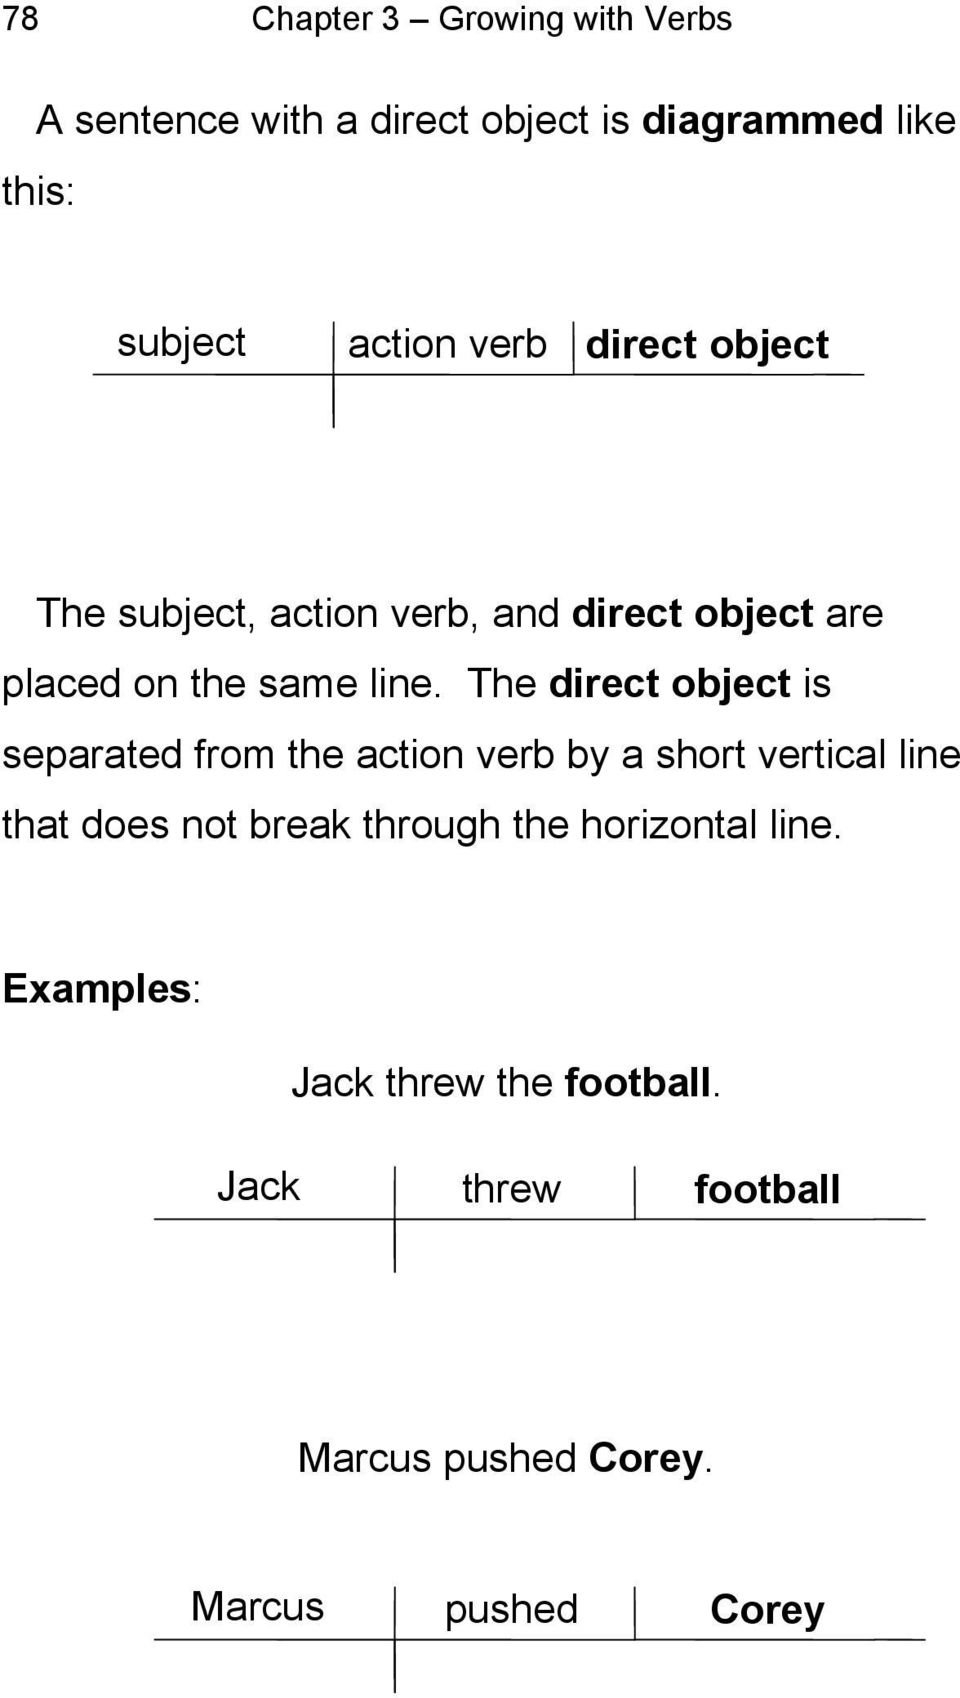 The direct object is separated from the action verb by a short vertical line that does not break through